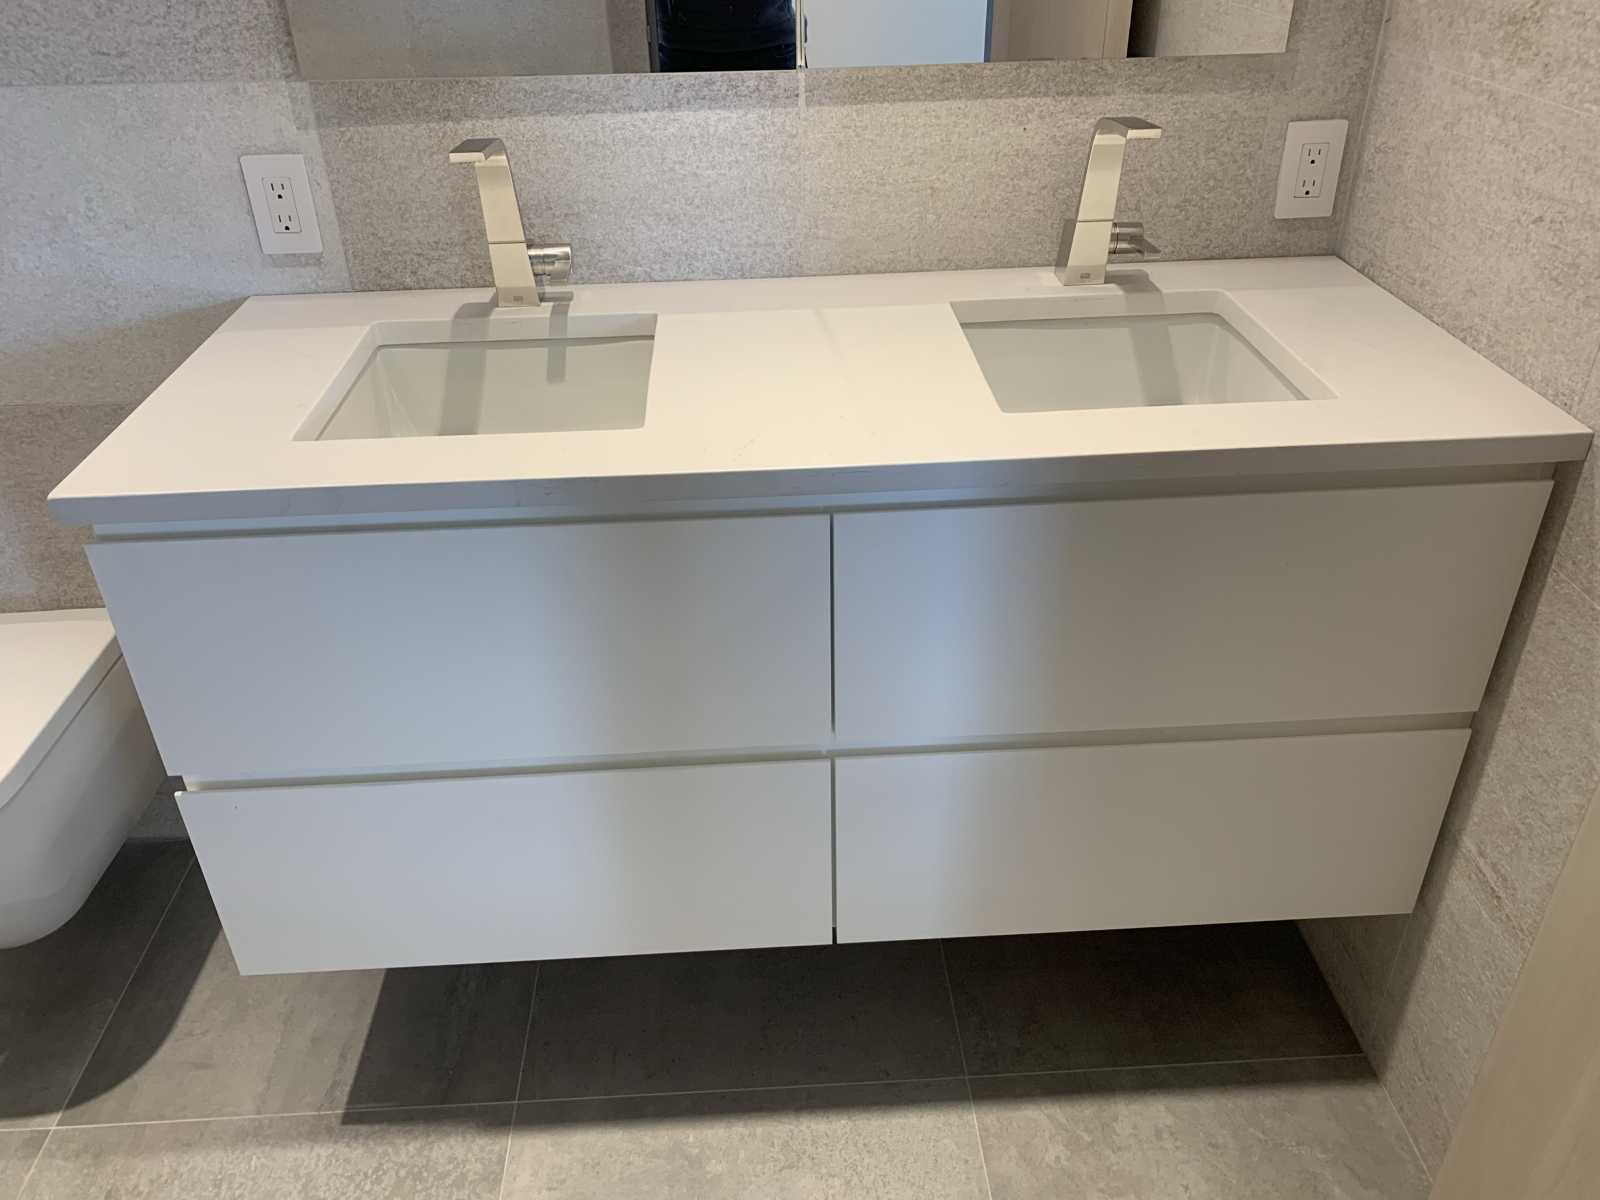 a small custom vanity with two rectangular sinks - front view